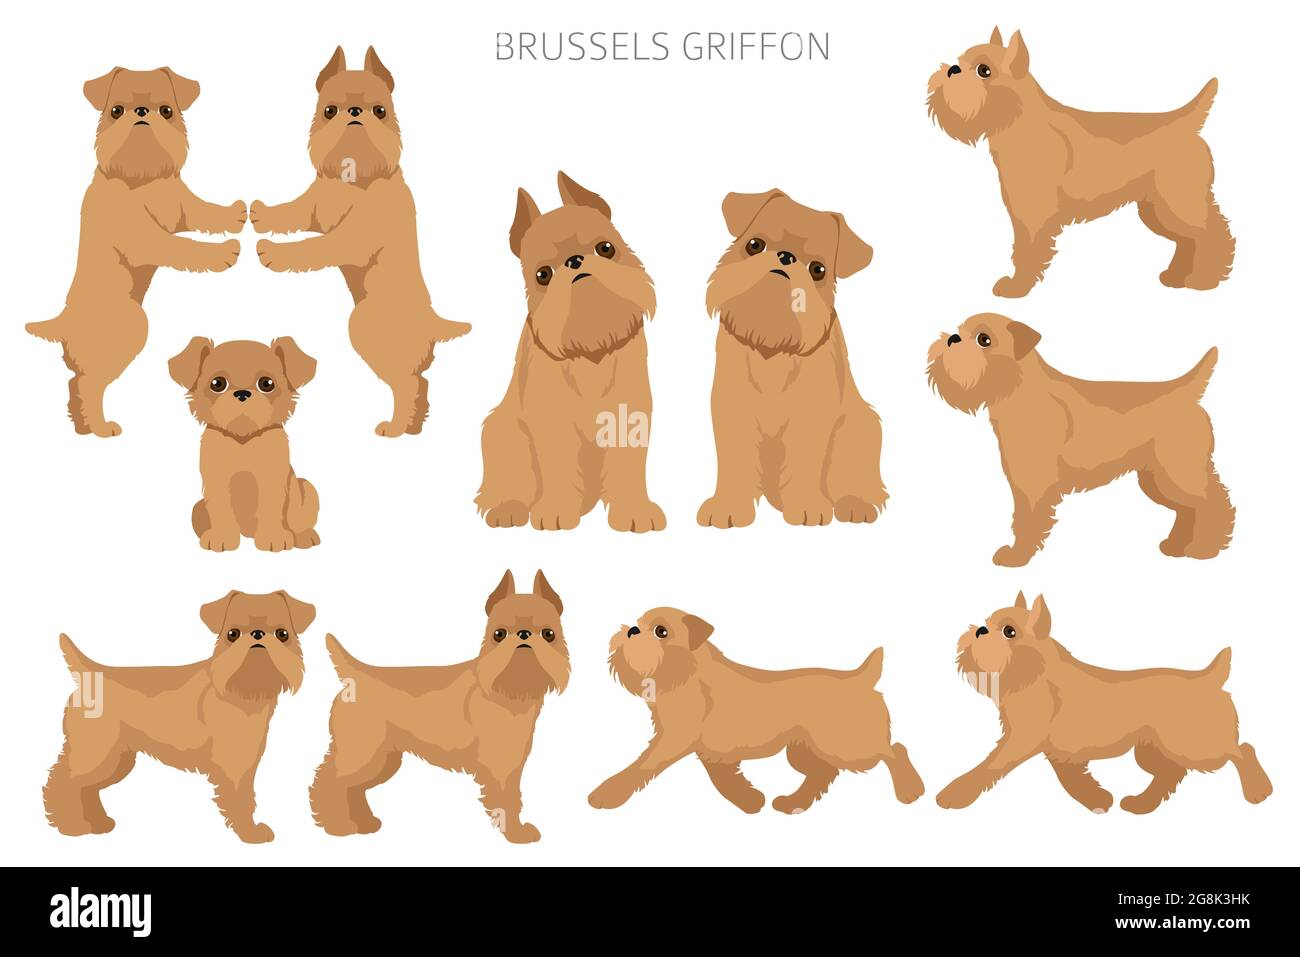 Brussels griffon clipart. Different coat colors and poses set.  Vector illustration Stock Vector